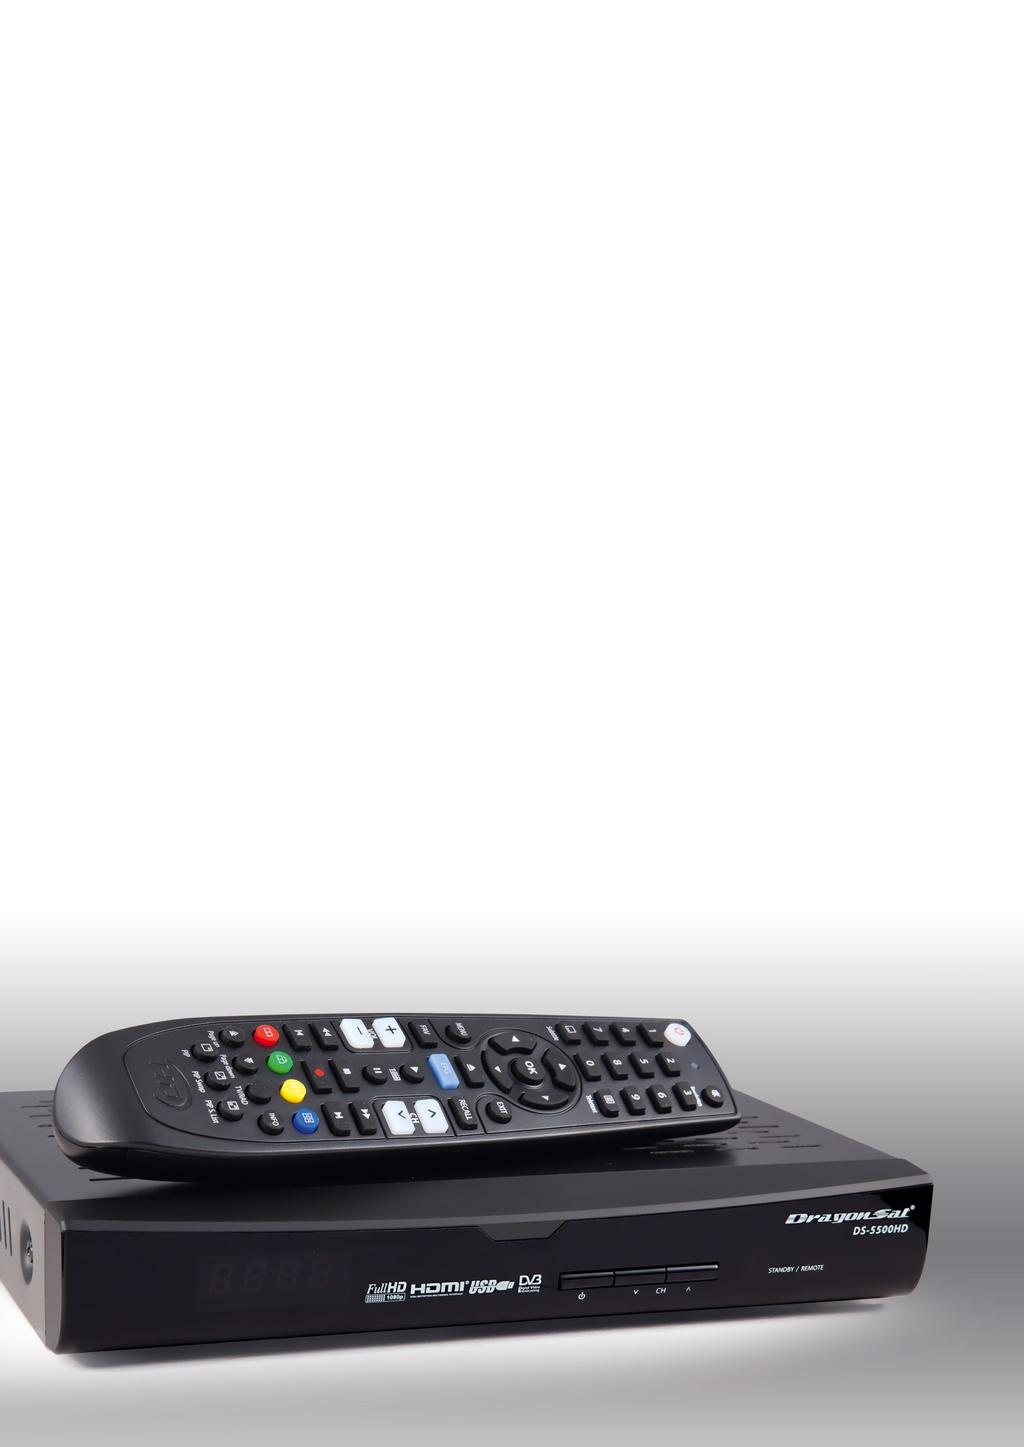 TEST REPORT HDTV Satellite Receiver A Satellite Receiver with Many Excellent Features Just because it s a high quality receiver doesn t mean it has to be big.